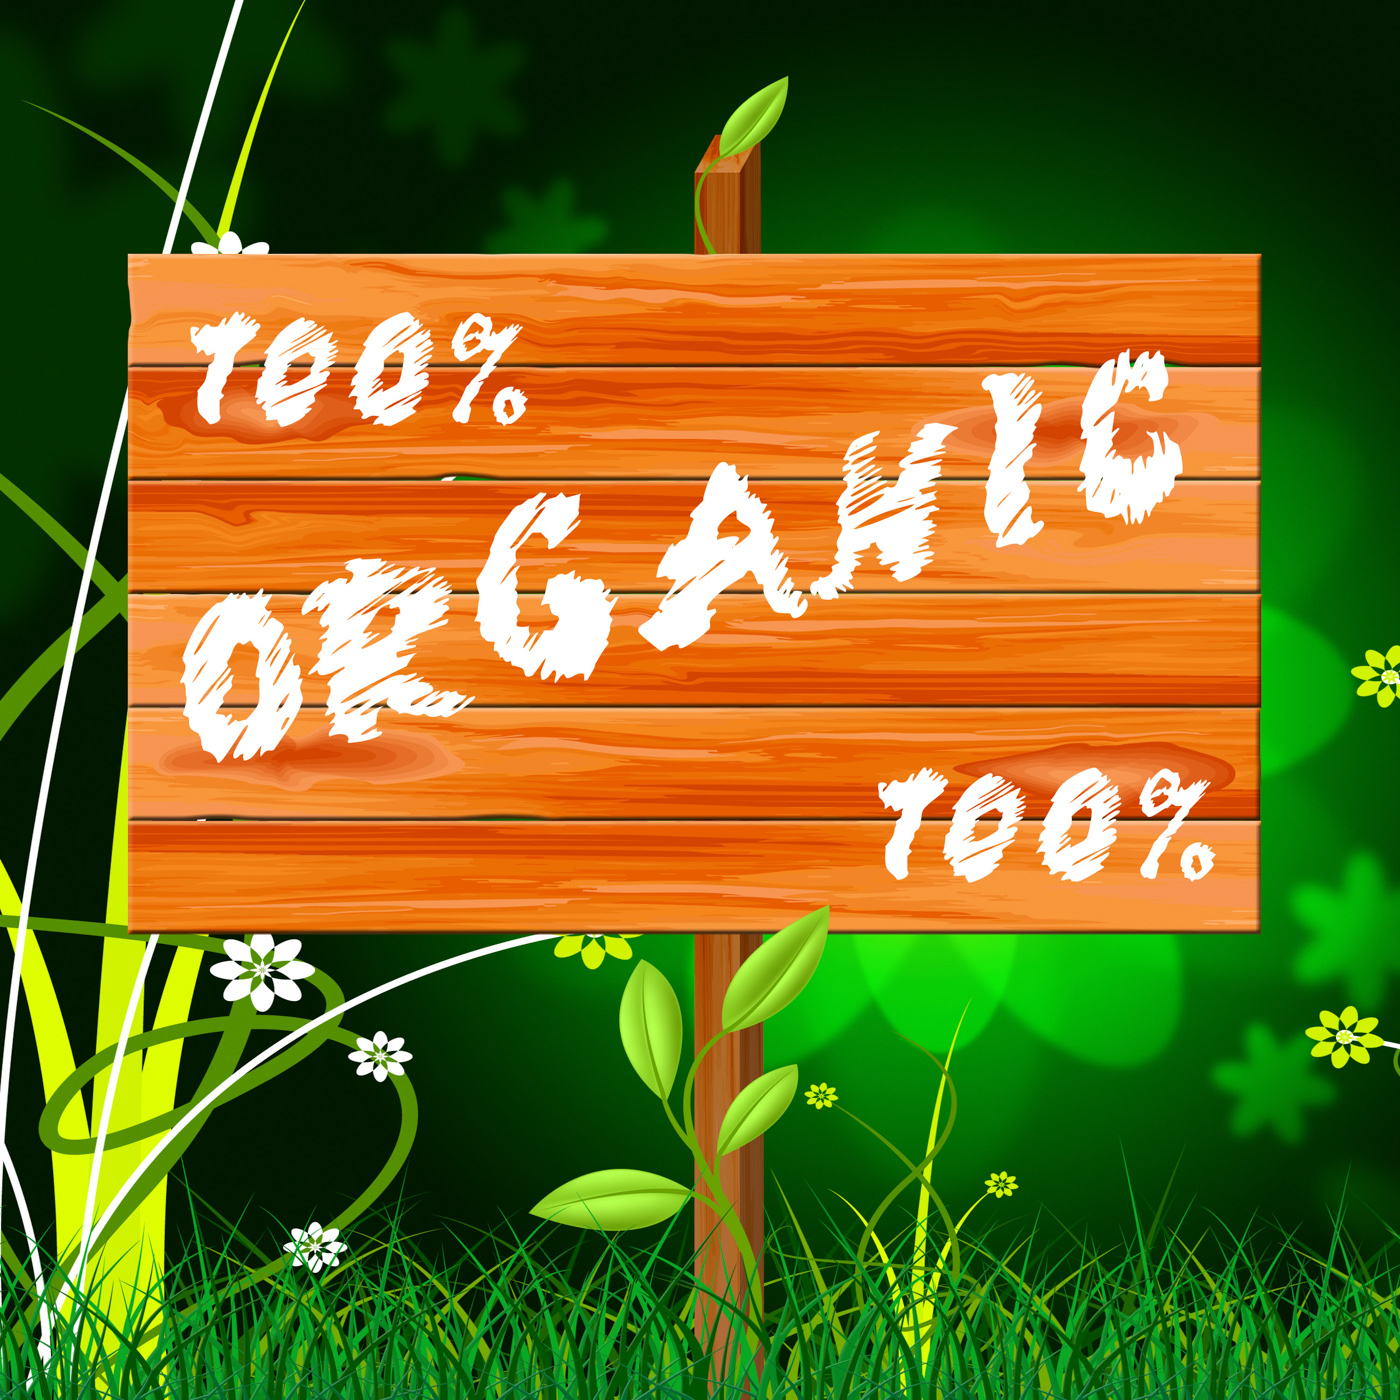 One hundred percent means organic products and completely photo